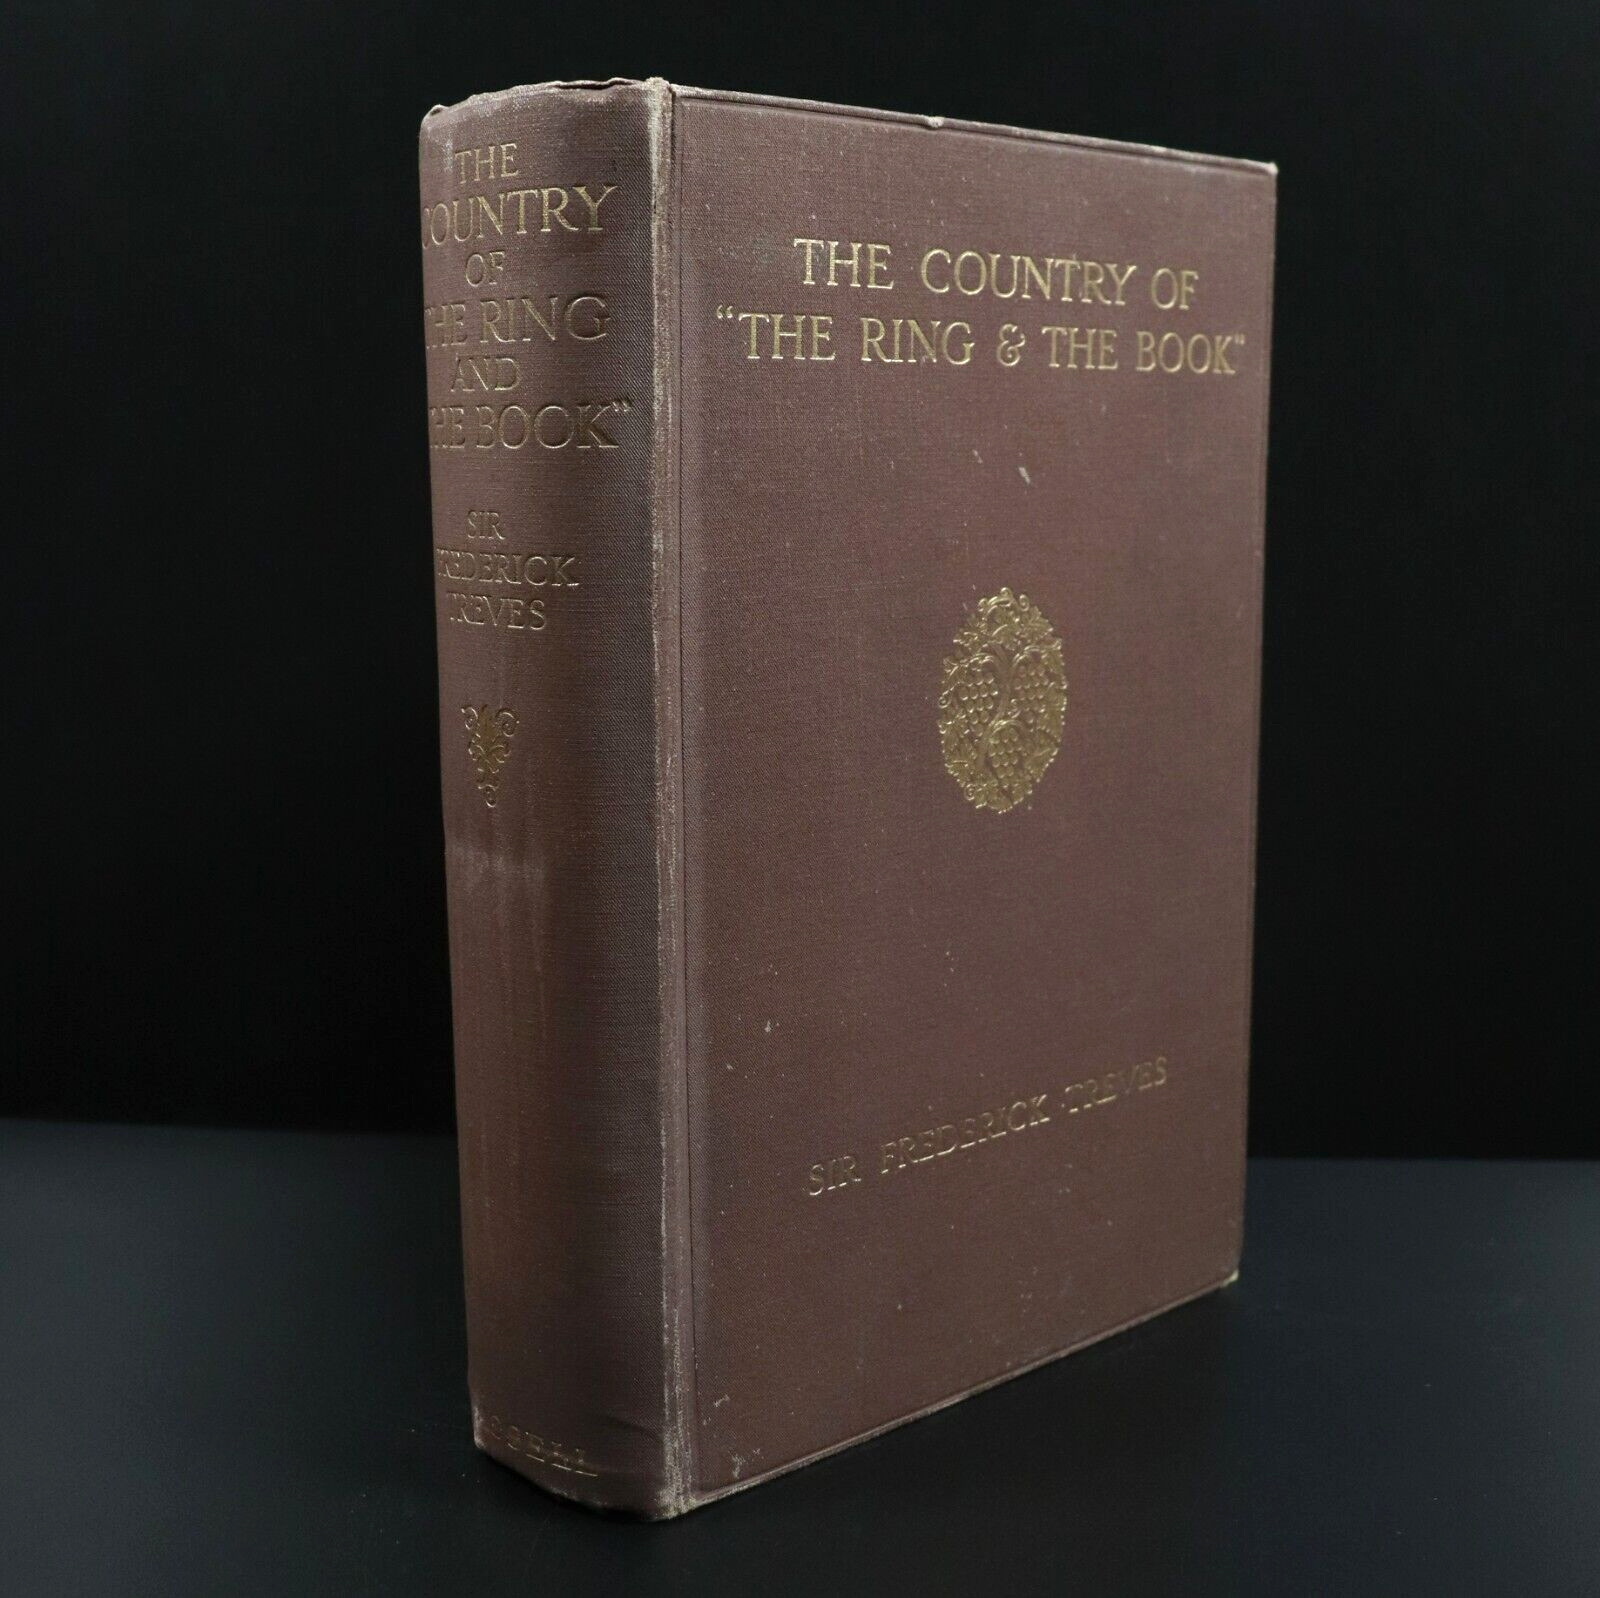 1913 The Country Of "The Ring & The Book" Antique Literature Book 1st Edition